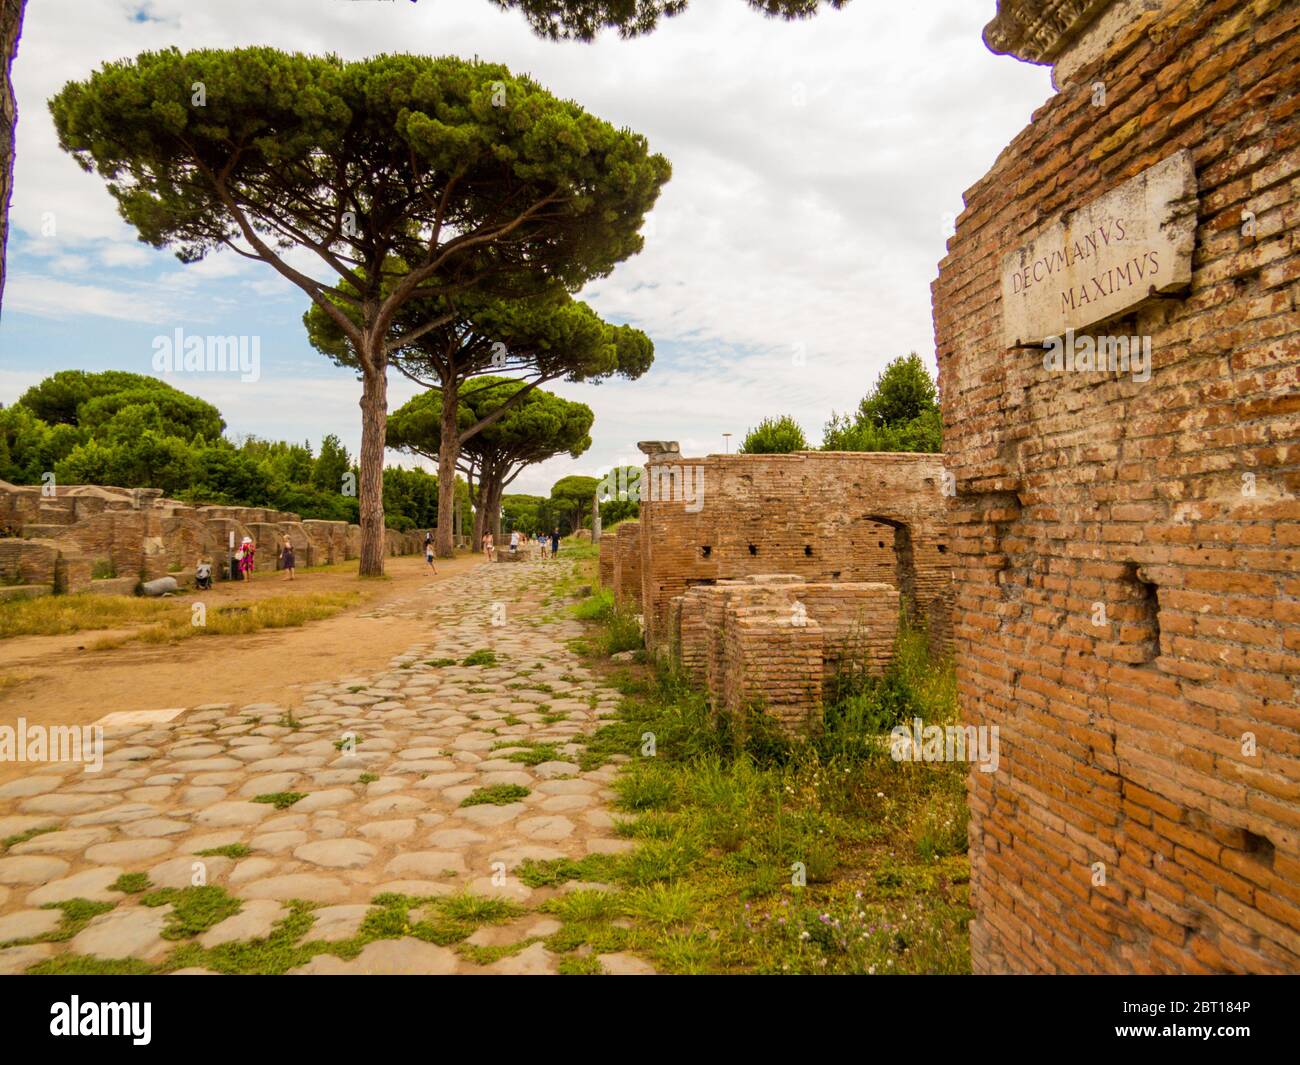 Ostia Antica, Italy - 12th July, 2019: View of the Decumanus Maximus in the ancient Roman archaeological site of Ostia Antica near Rome. Stock Photo